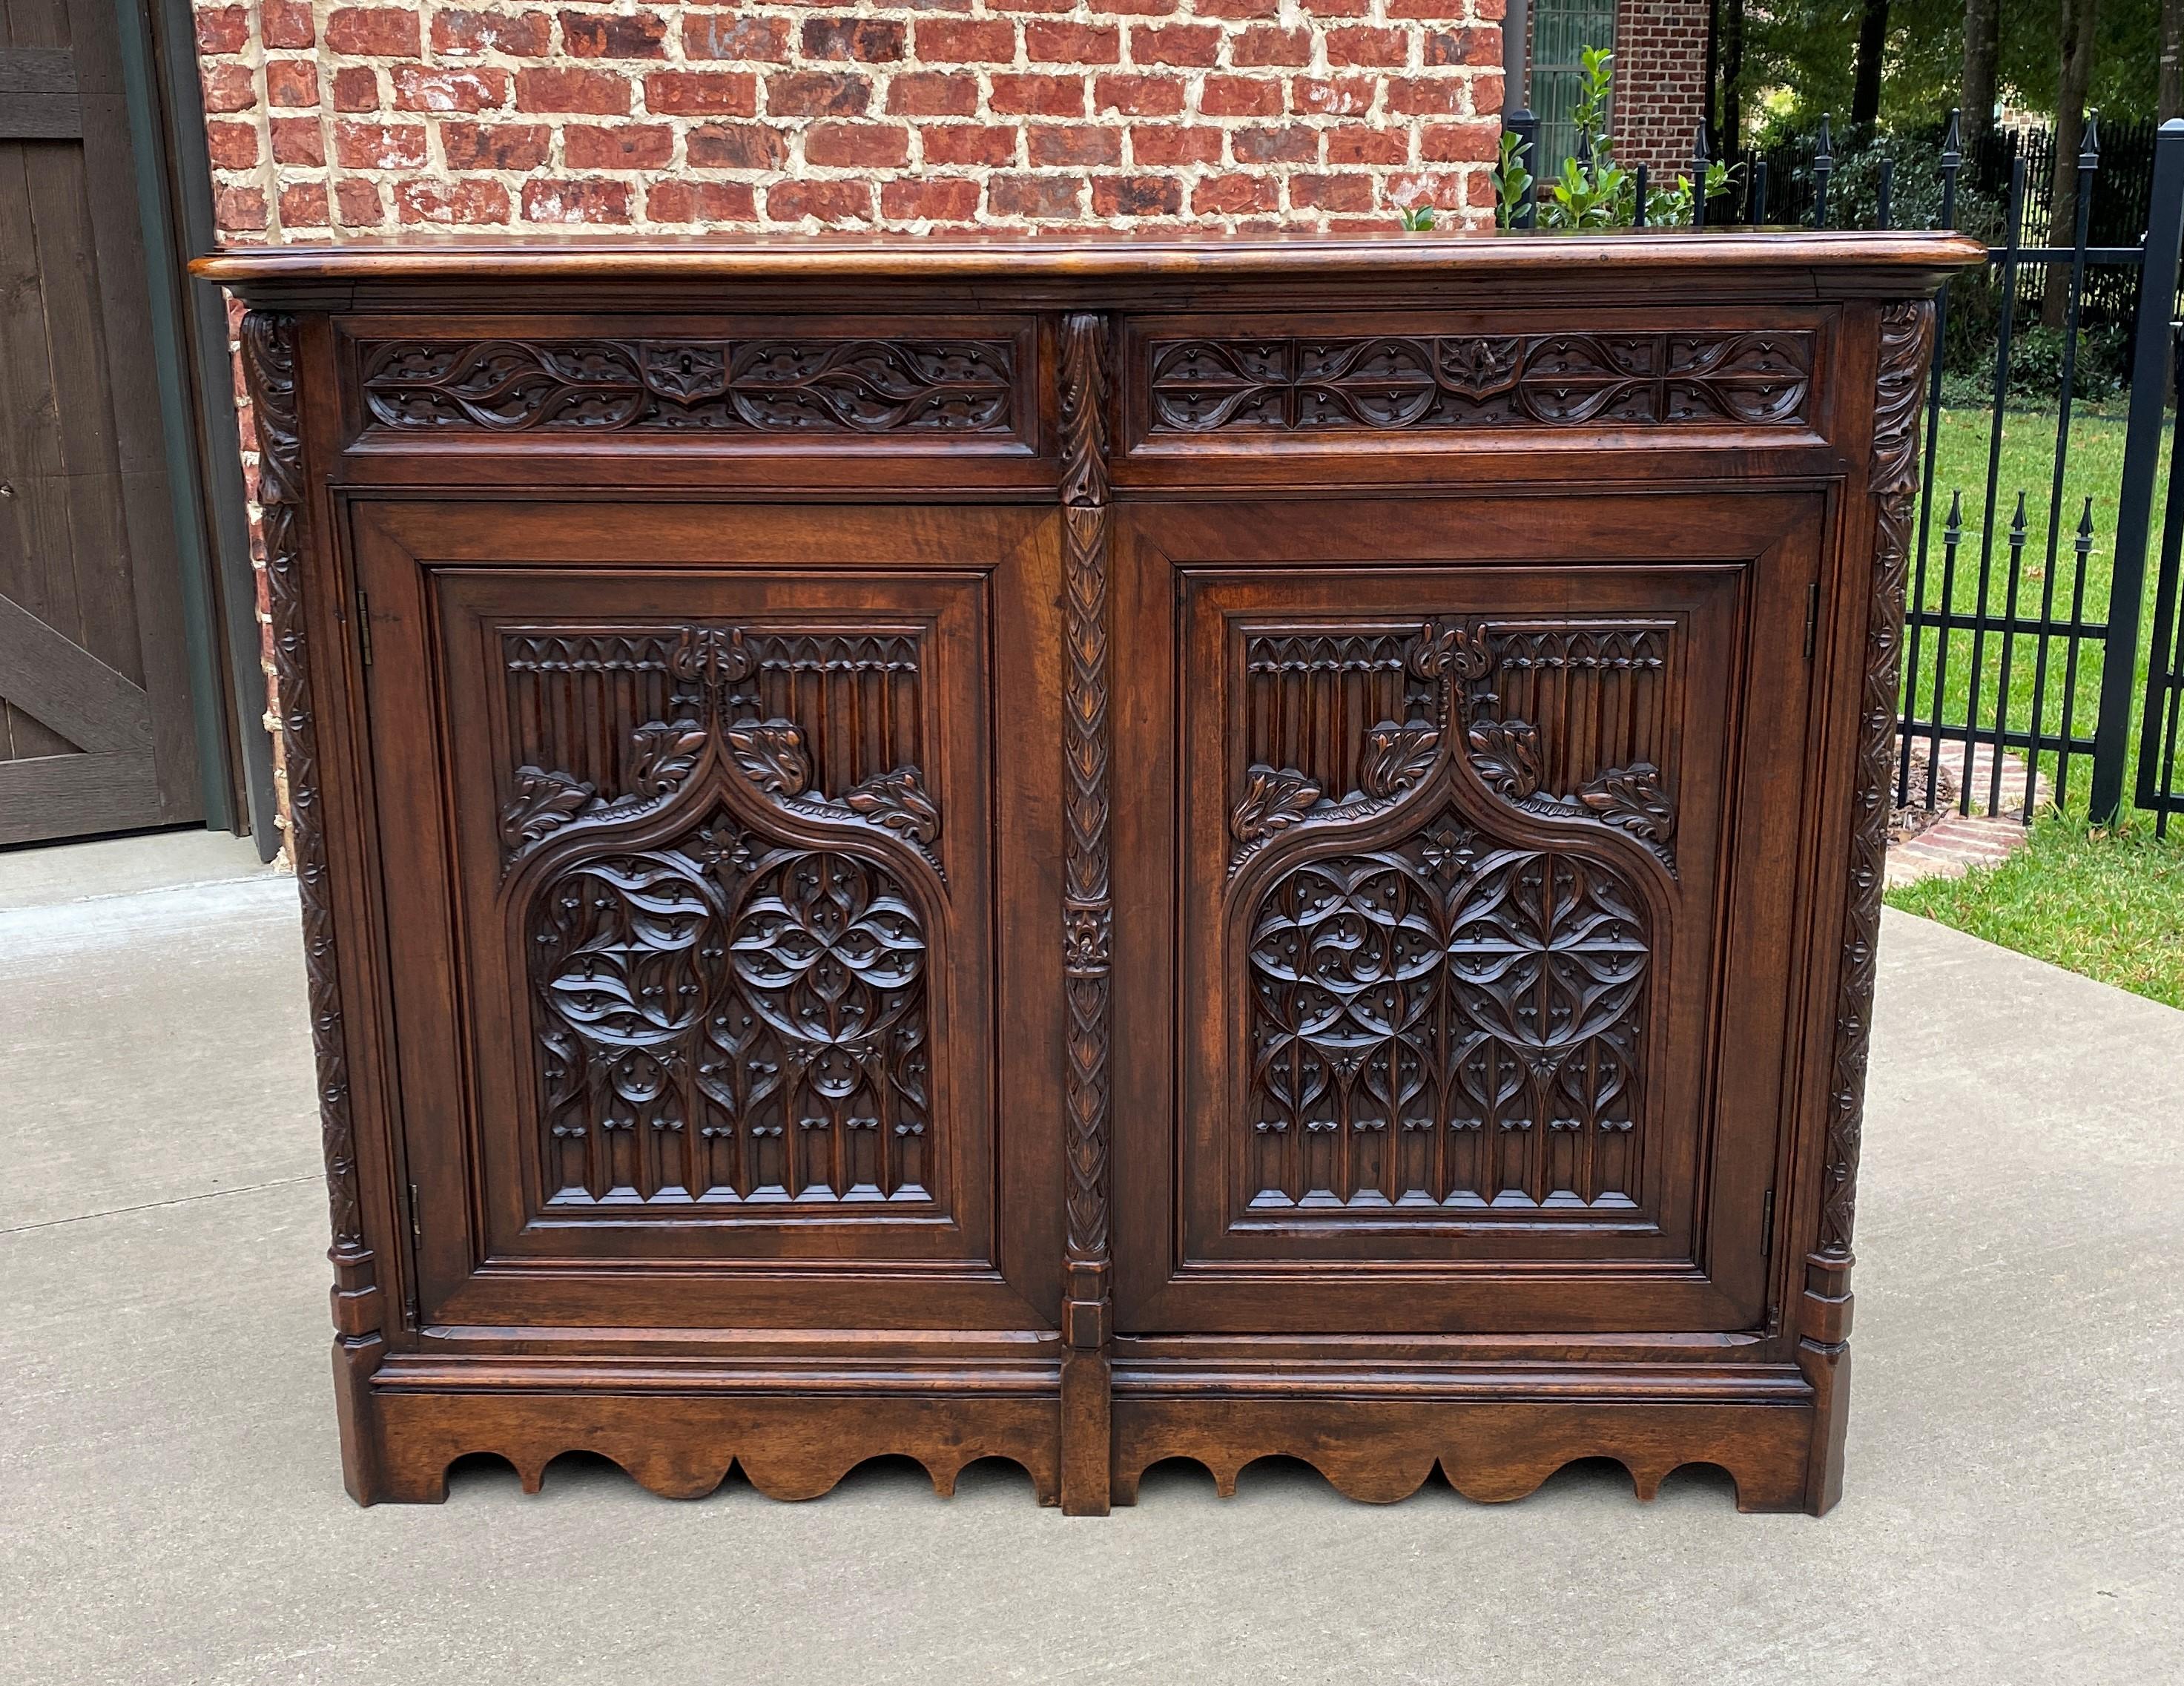 Antique French Walnut Gothic Revival Server Sideboard Buffet cabinet~~c. 1880s 

Beautifully carved throughout~~classic Gothic Revival linen fold sides with thick tracery center door panels~~two hand-cut, dovetailed drawers~~two original keys